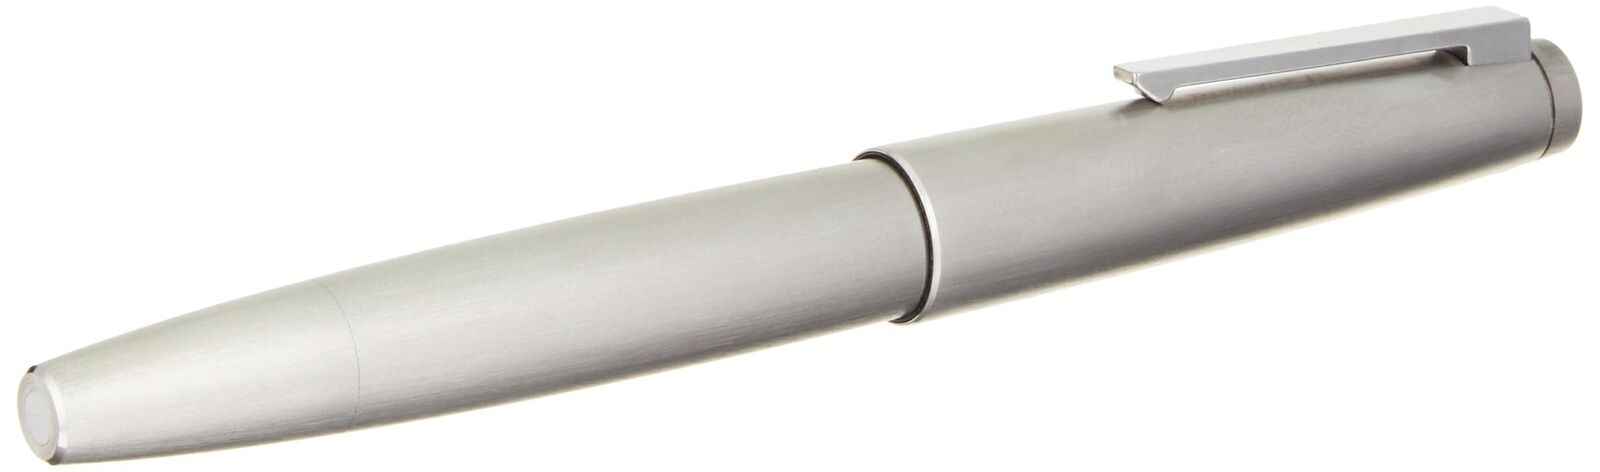 LAMY 2000 Brushed Stainless Steel Fountain Pen Extra-Fine Nib (L02MEF) - 4029585